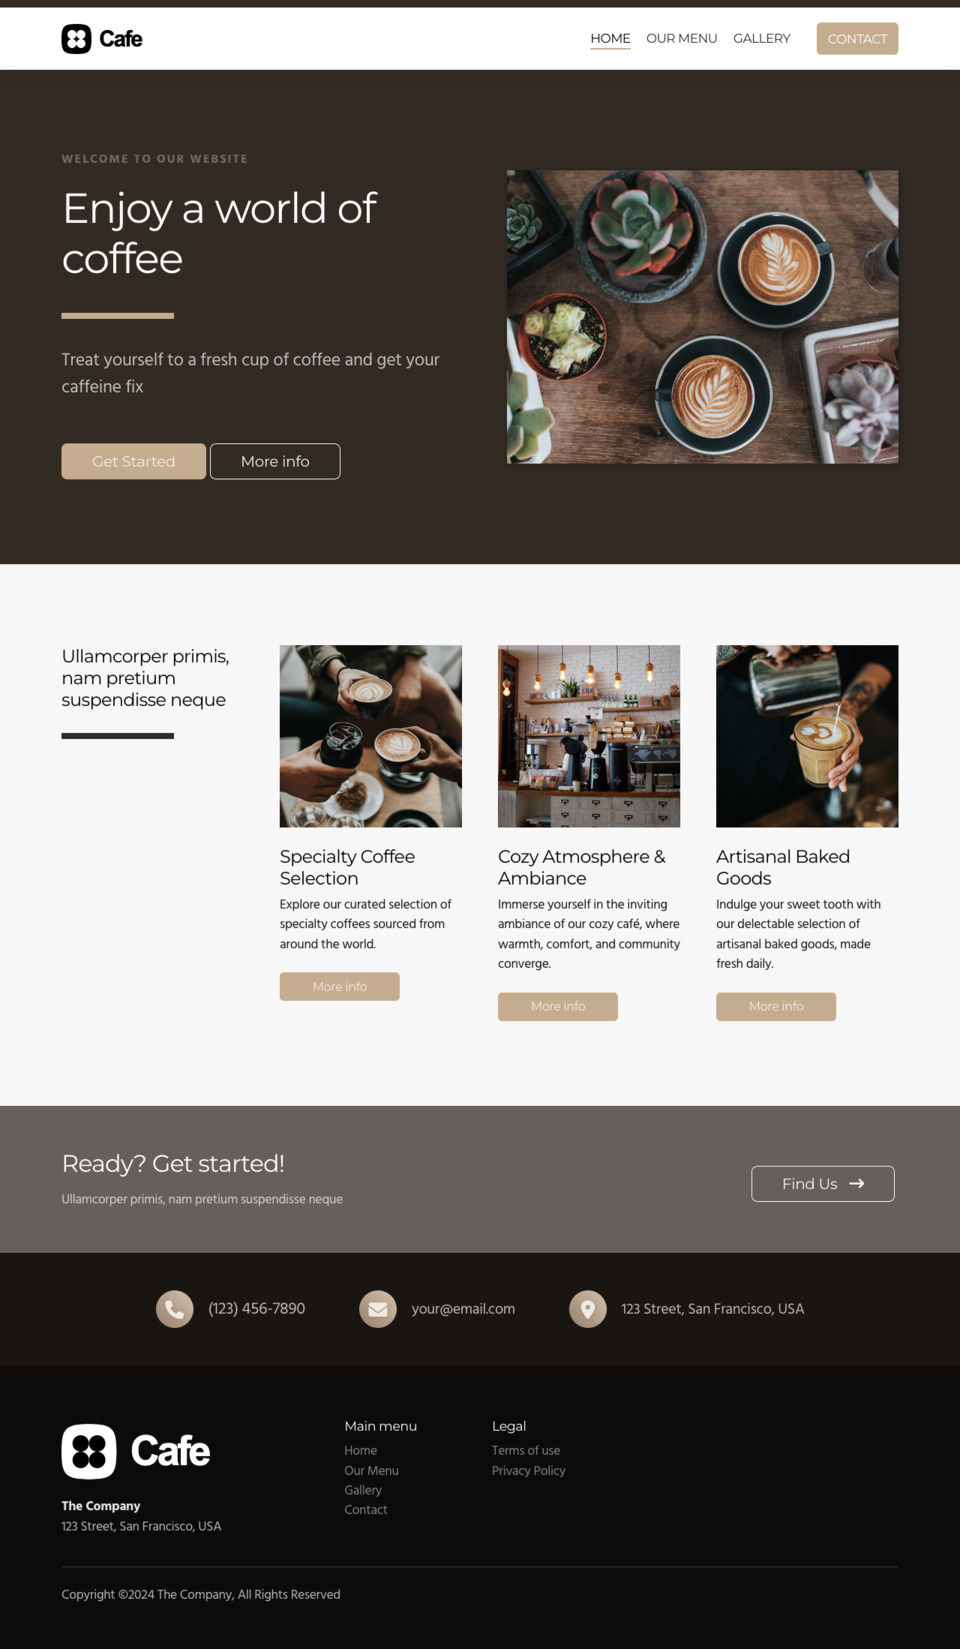 Cafe Website Template - Ideal for cafes, coffee shops, roasteries, and any coffee-related businesses looking to establish an online presence.